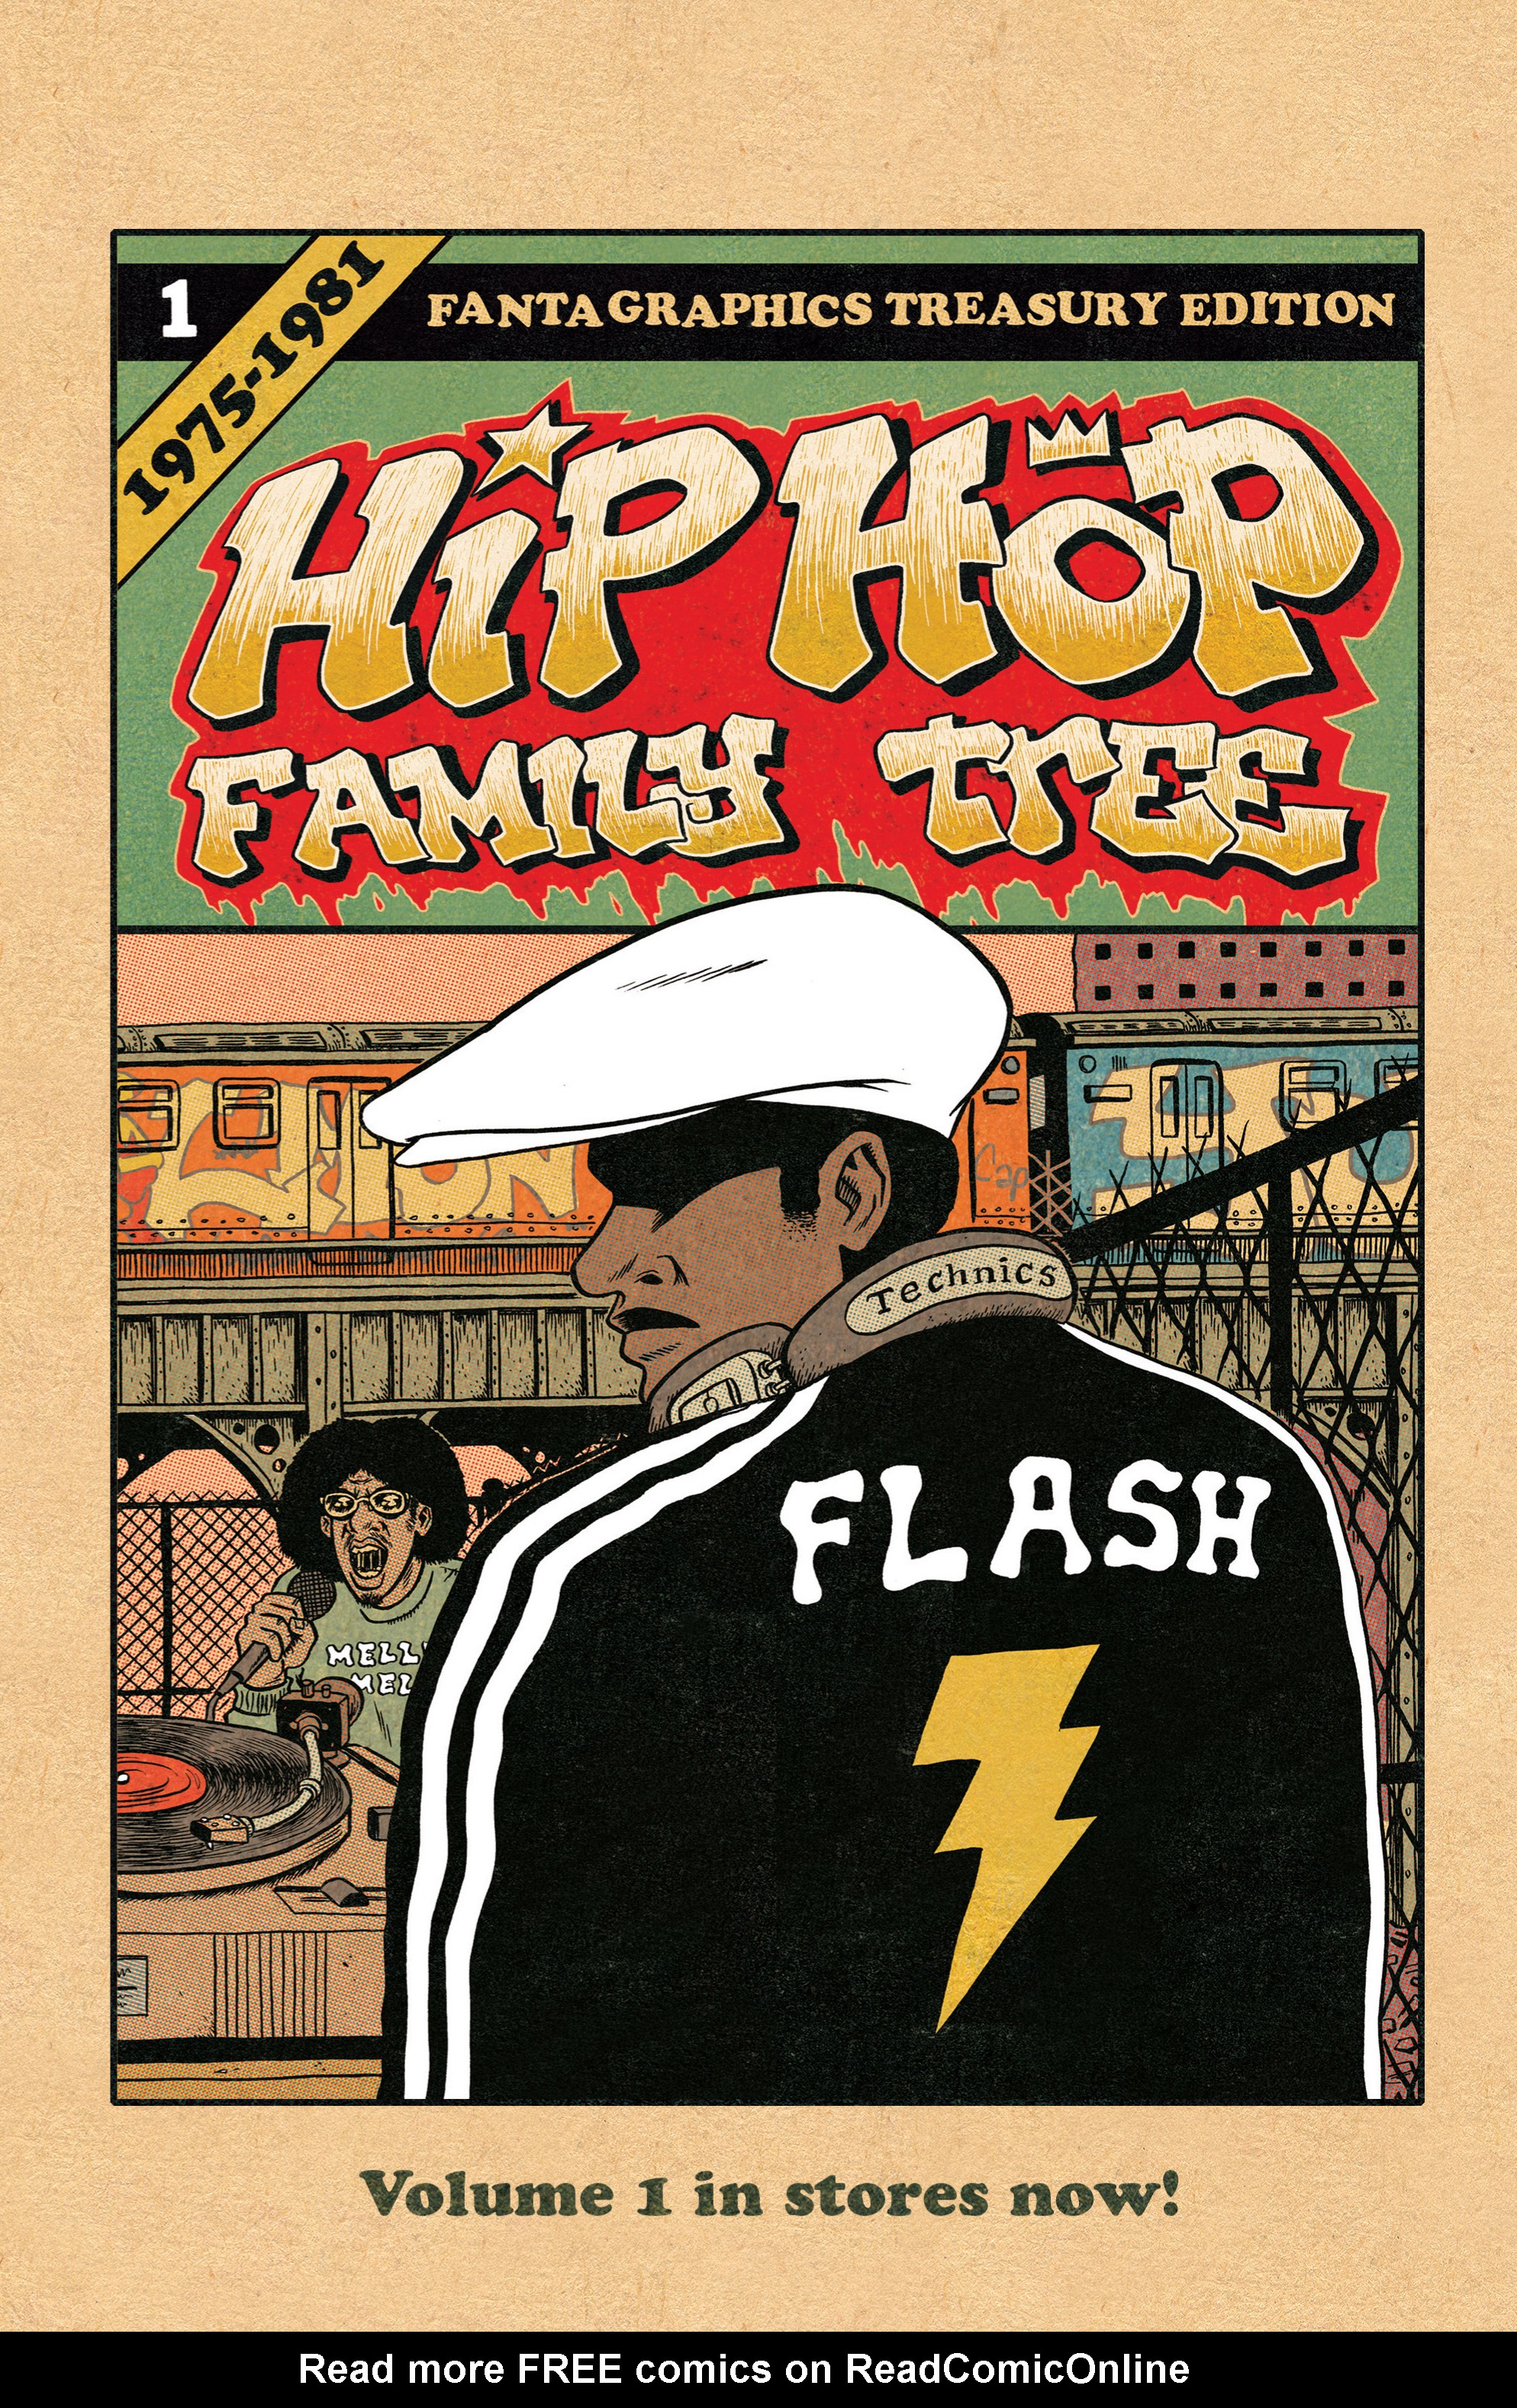 Read online Free Comic Book Day 2015 comic -  Issue # Hip Hop Family Tree Three-in-One - Featuring Cosplayers - 4